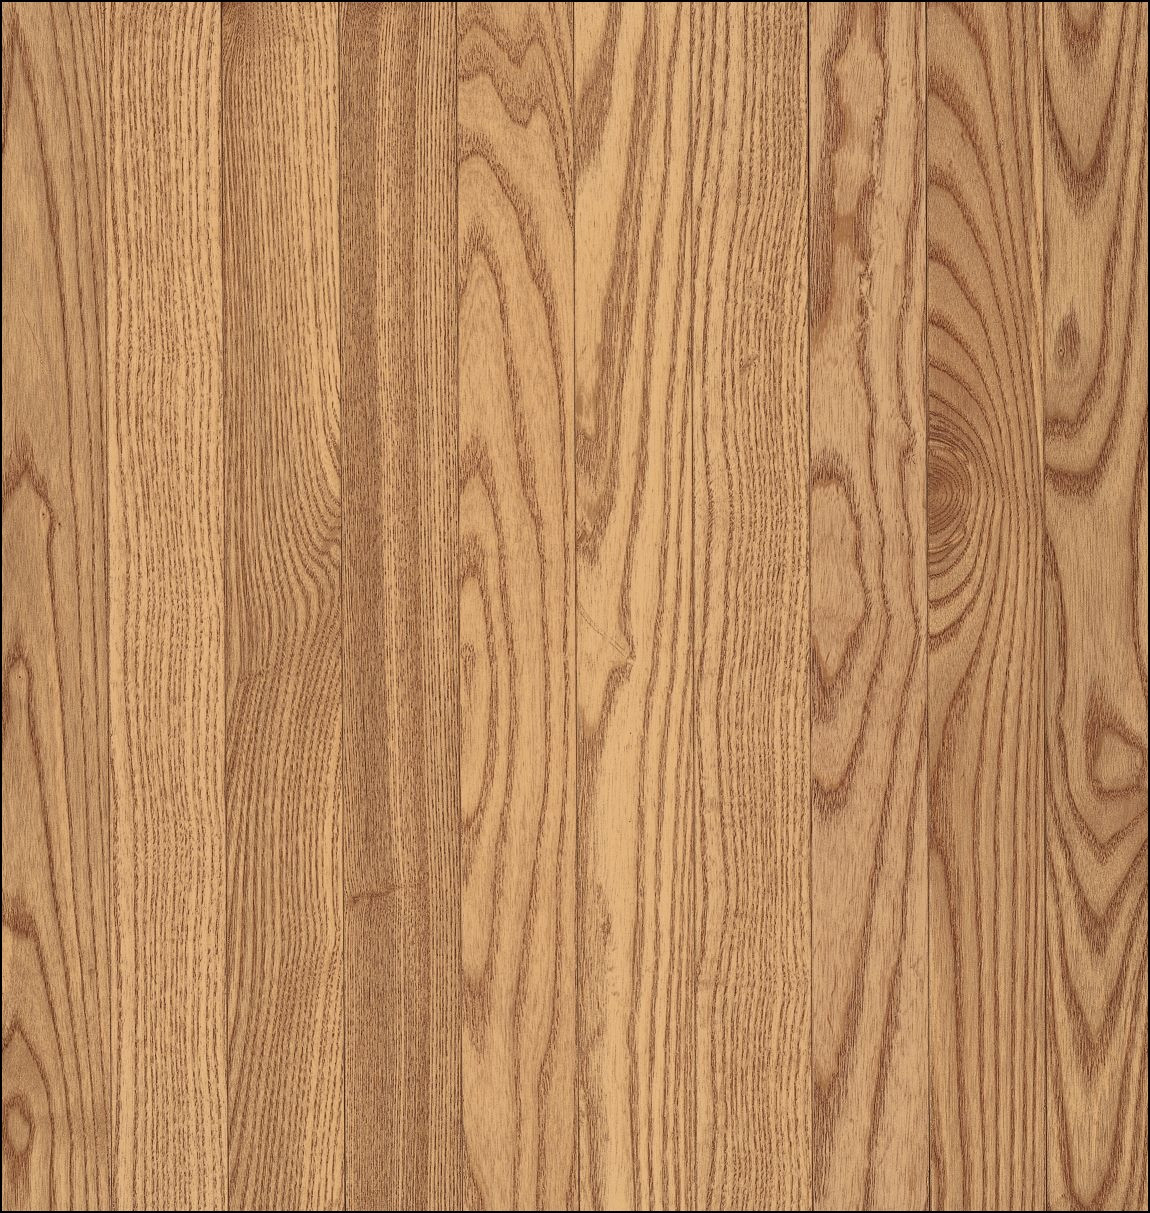 22 Famous Bruce 3 4 Hardwood Flooring 2024 free download bruce 3 4 hardwood flooring of laminate flooring reviews flooring ideas with laminate flooring stair nose molding stock red oak hardwood flooring beige c8310 by bruce flooring of